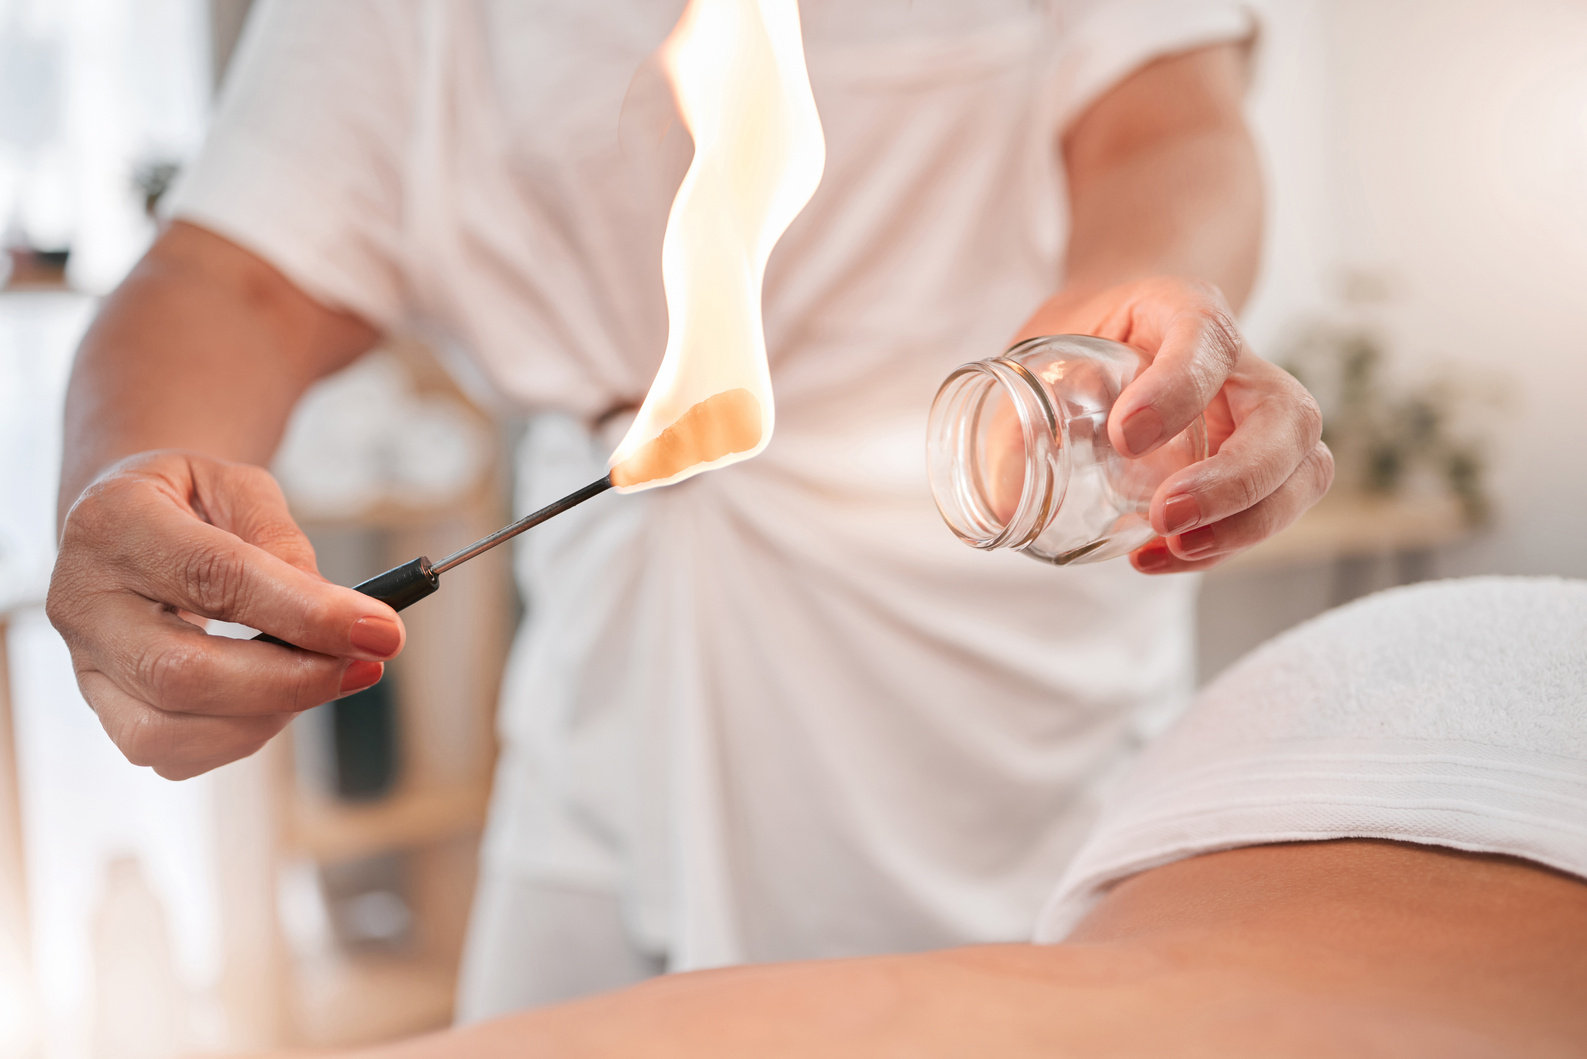 Fire Massage, Flame and Heating for Cupping Spa  for Holistic Wellness with Glass Jars. Beauty, Luxury Skincare and Body Treatment of a Physical  Session to Find Relax, Peace and Health